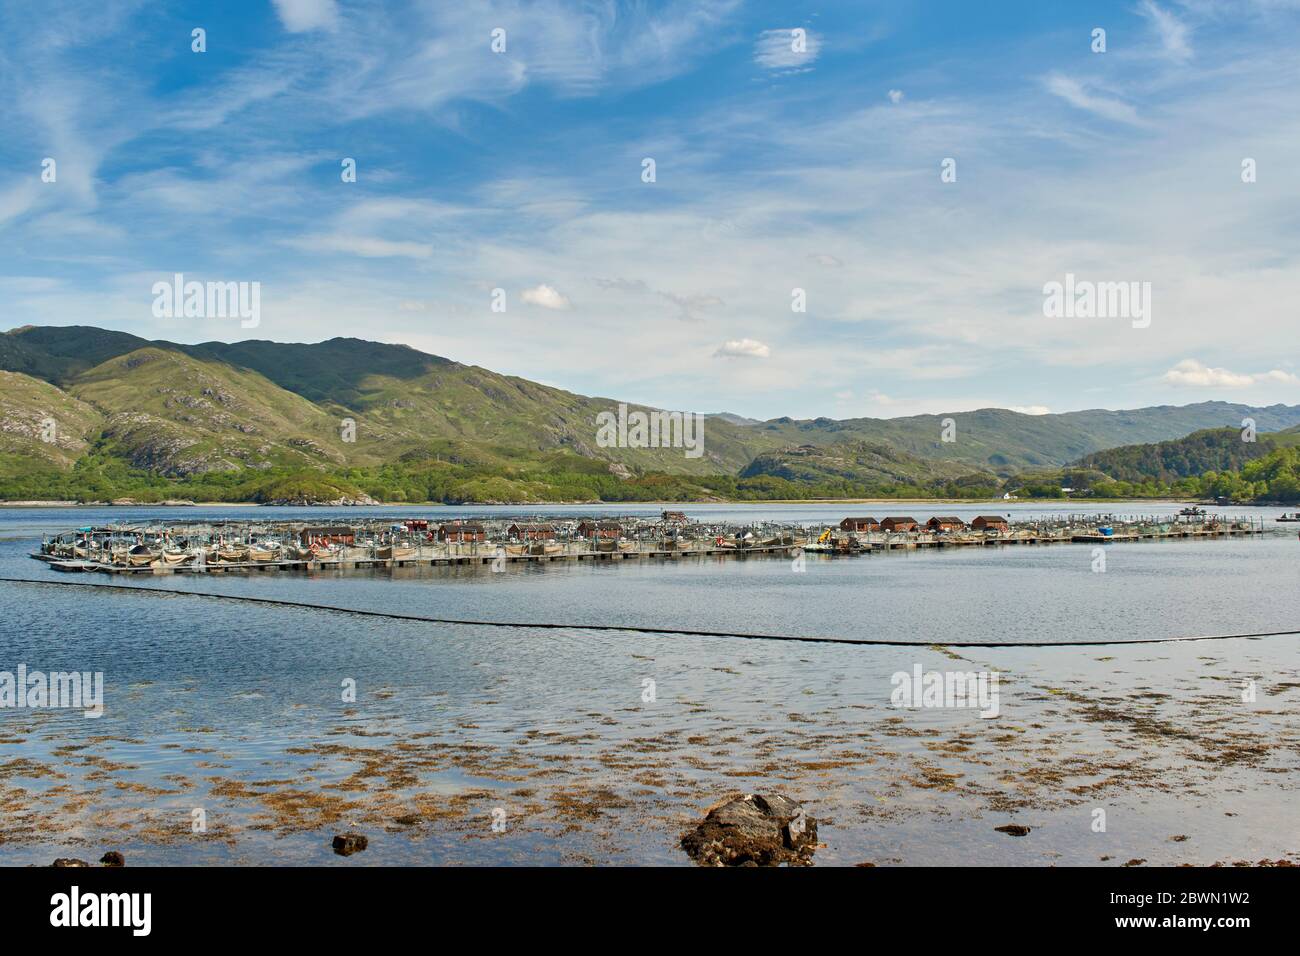 WEST COAST HIGHLANDS SCOTLAND VIEW OF A SALMON FISH FARM IN THE SEA LOCH AILORT A LARGE FISH HATCHERY Stock Photo